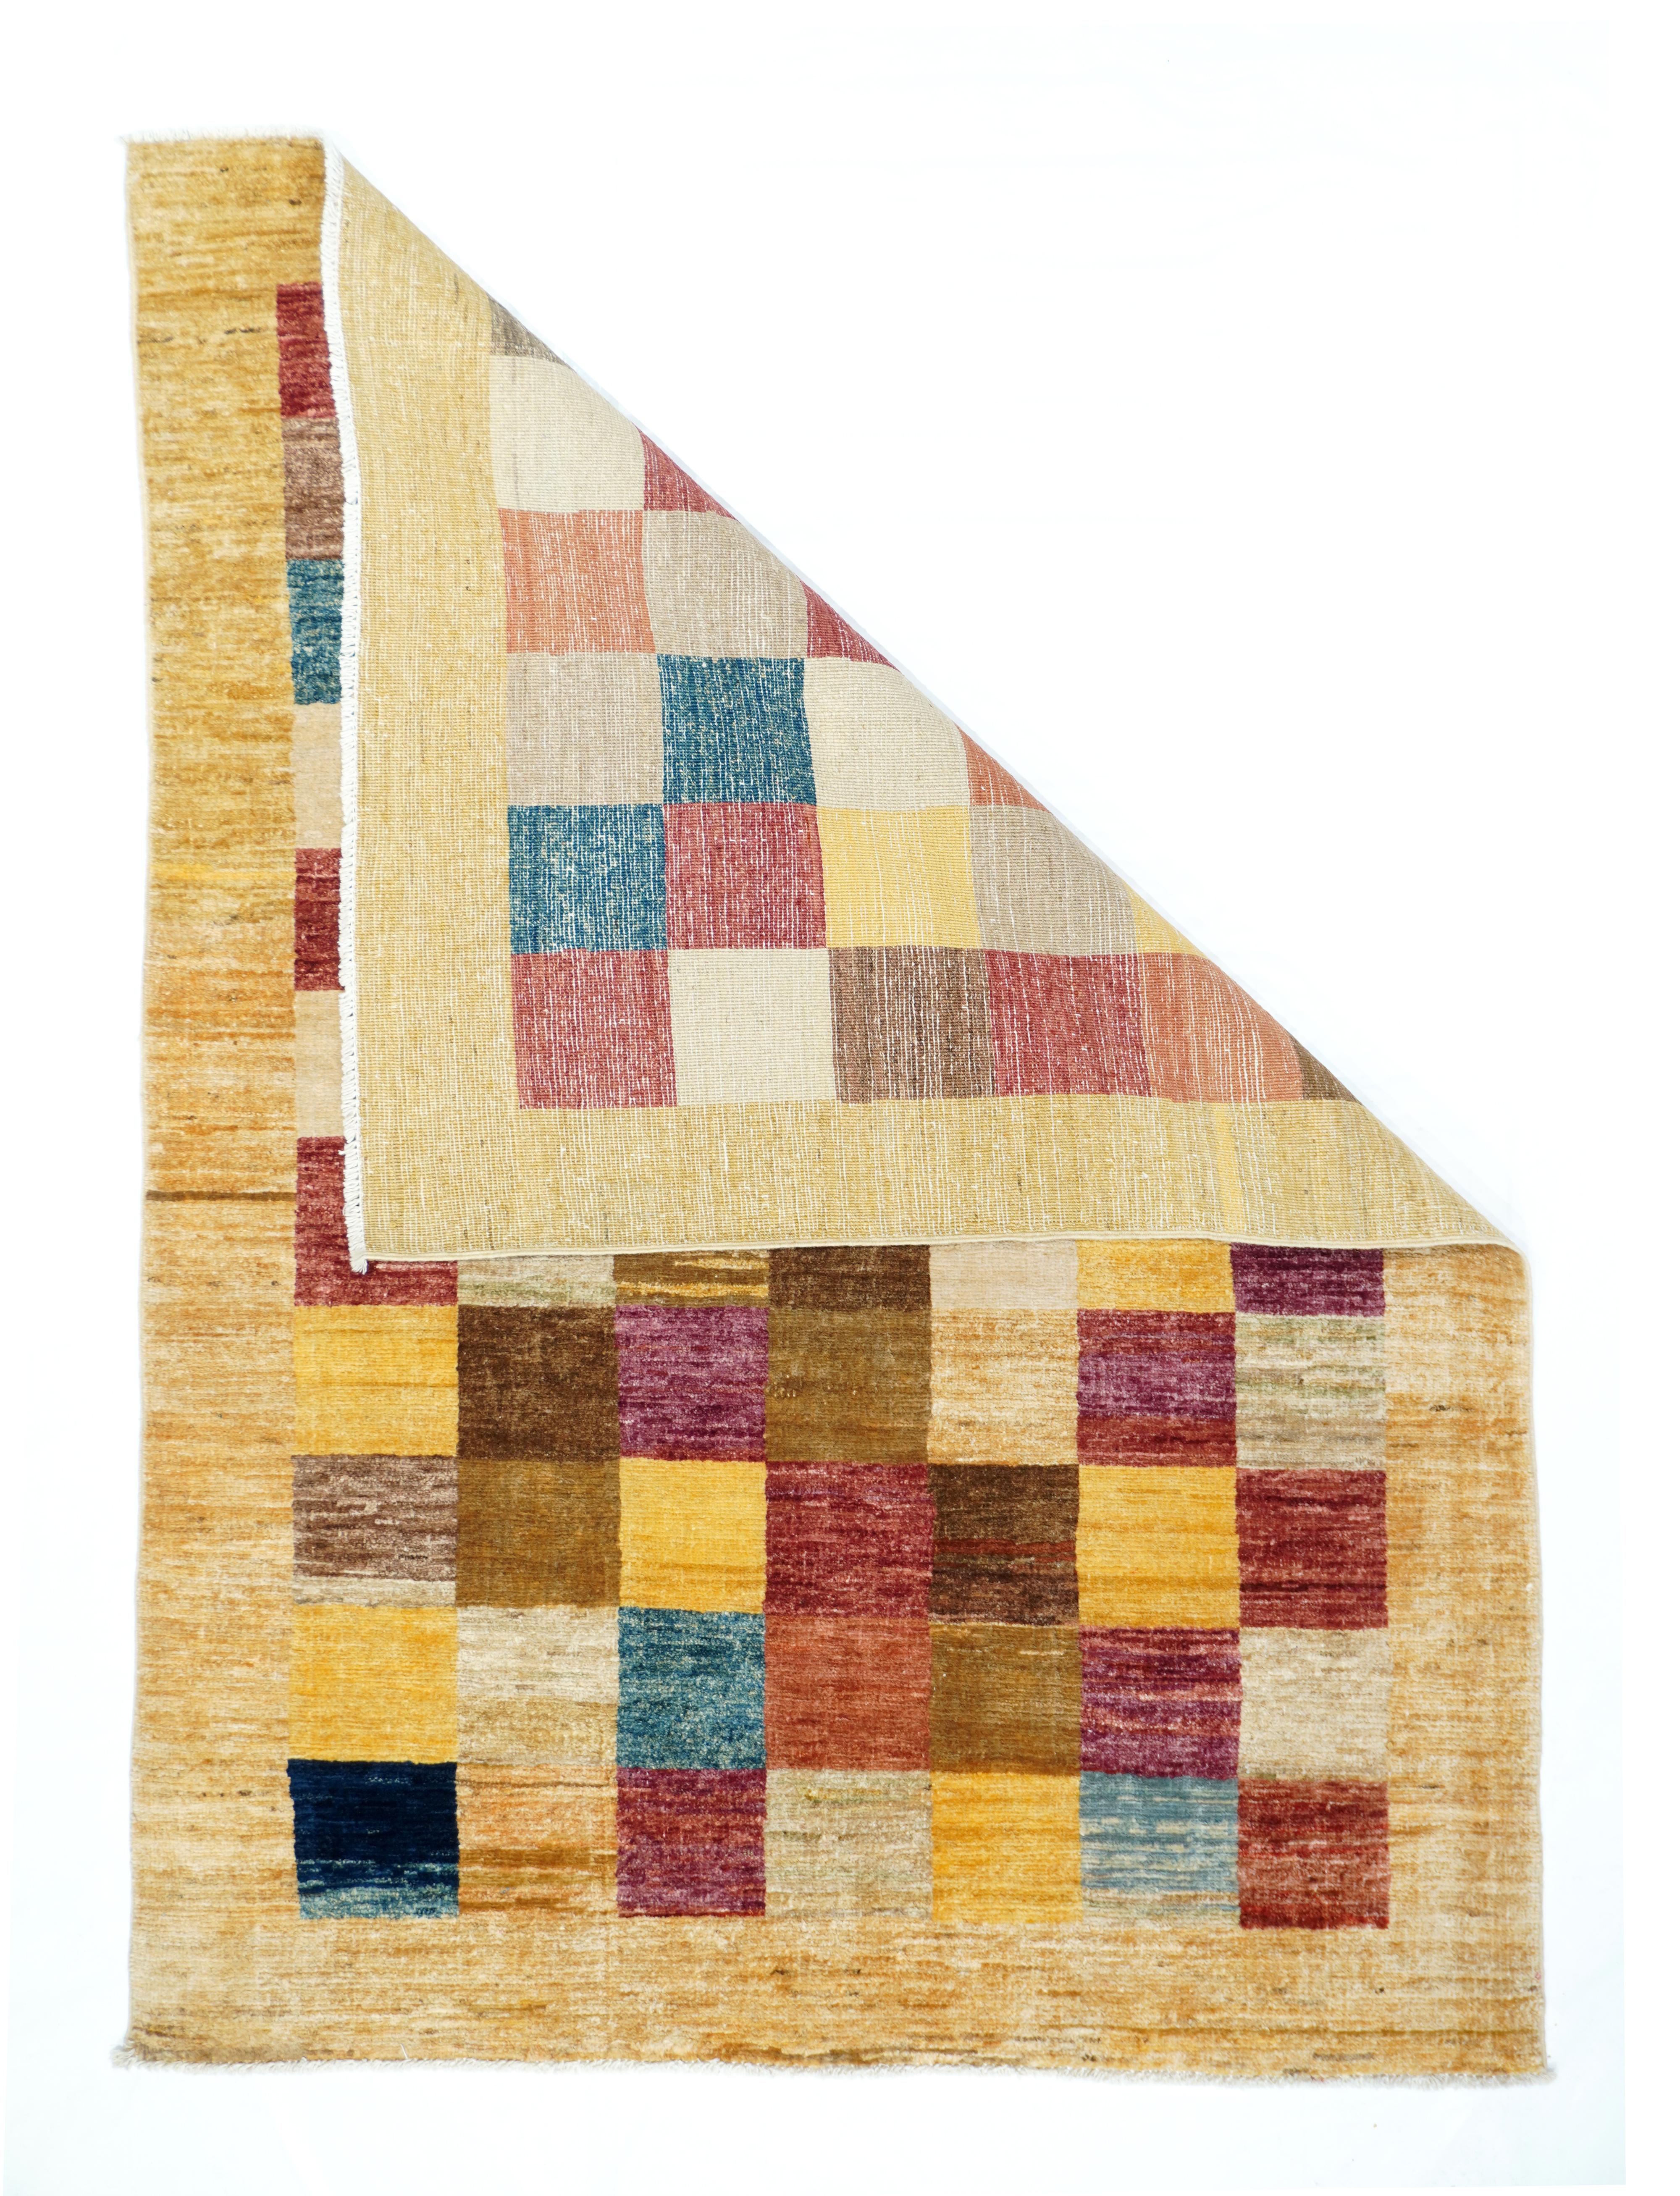 Gabbeh Rug 4' x 5'10''. This multicolor chessboard squares carpet shows plain, abrashed reserves in rust, red, navy, blue, deep straw, and beige, within an equally plain border. Random color placement, so no order is developed. Better that way,